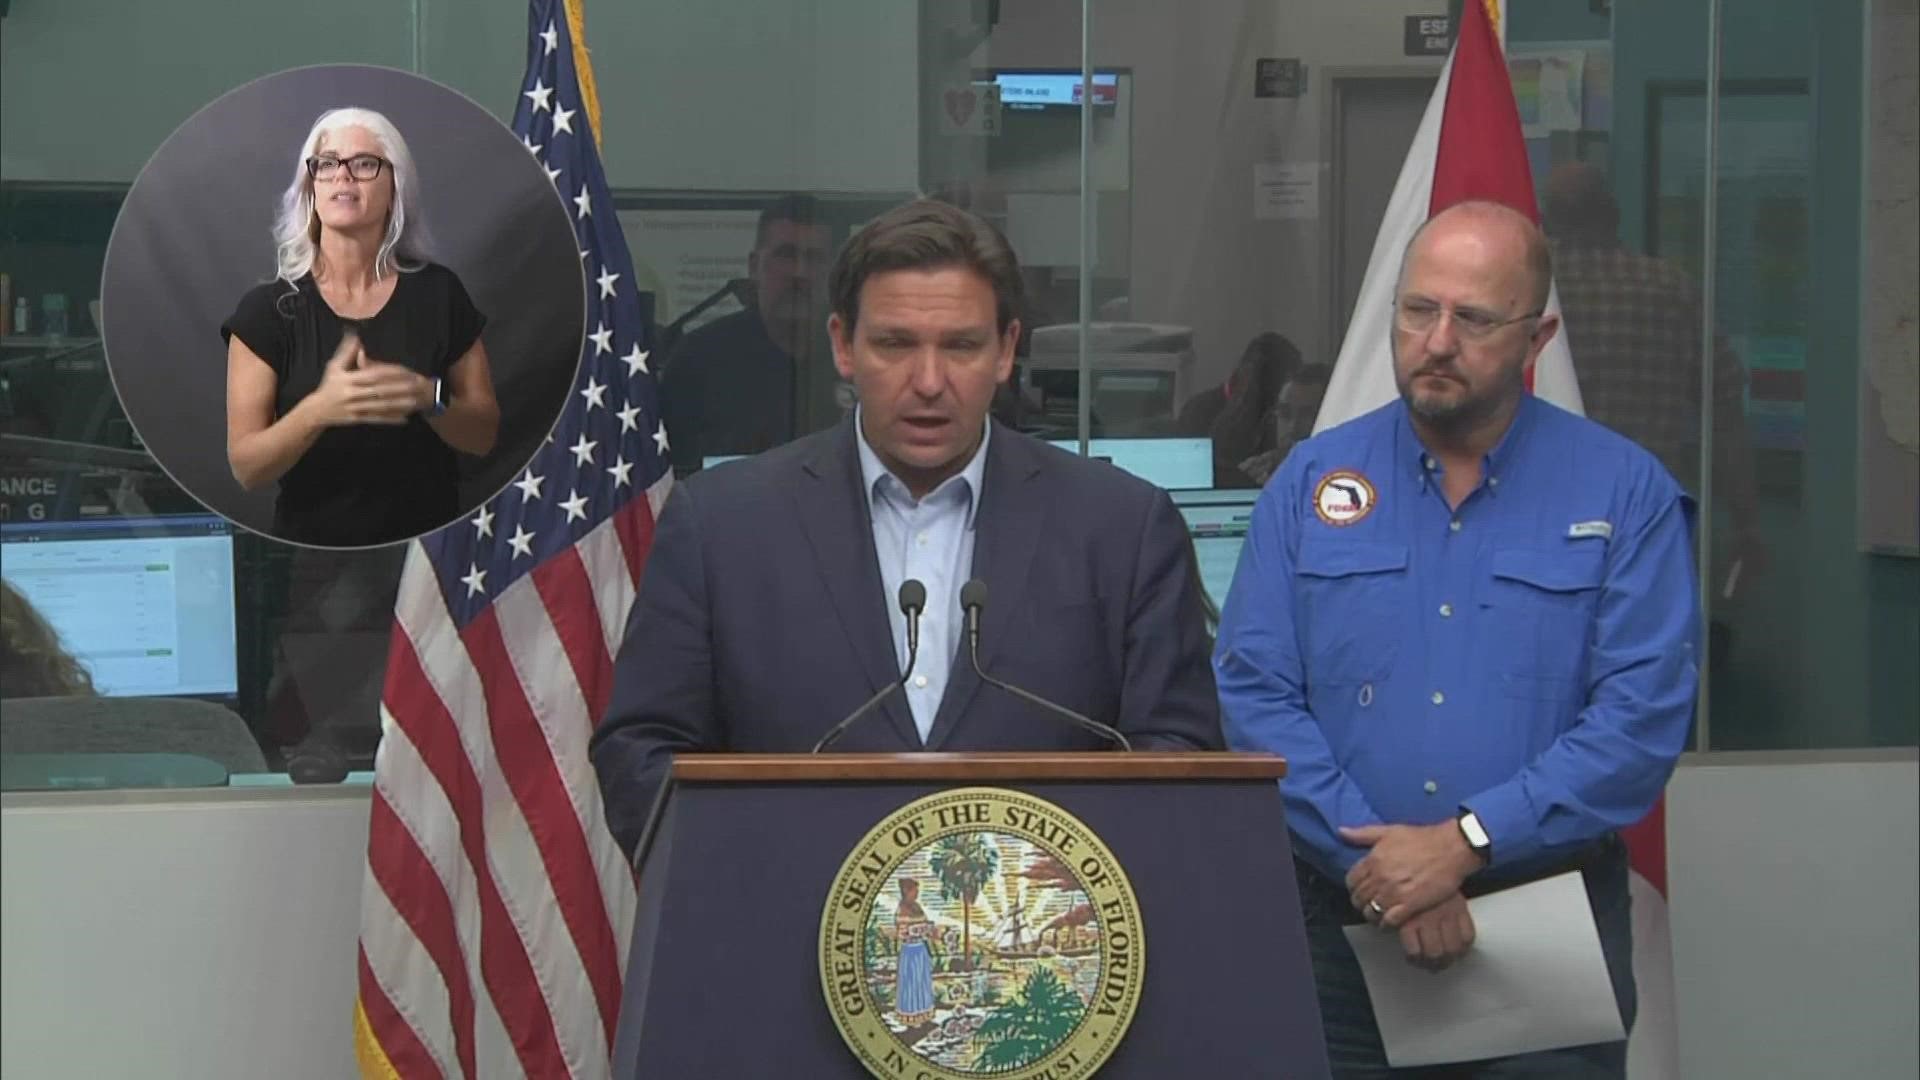 The state of Florida has already seen damage in Charlotte and Lee counties as of Wednesday. Governor DeSantis says there is a small chance Ian becomes a Cat 5 storm.